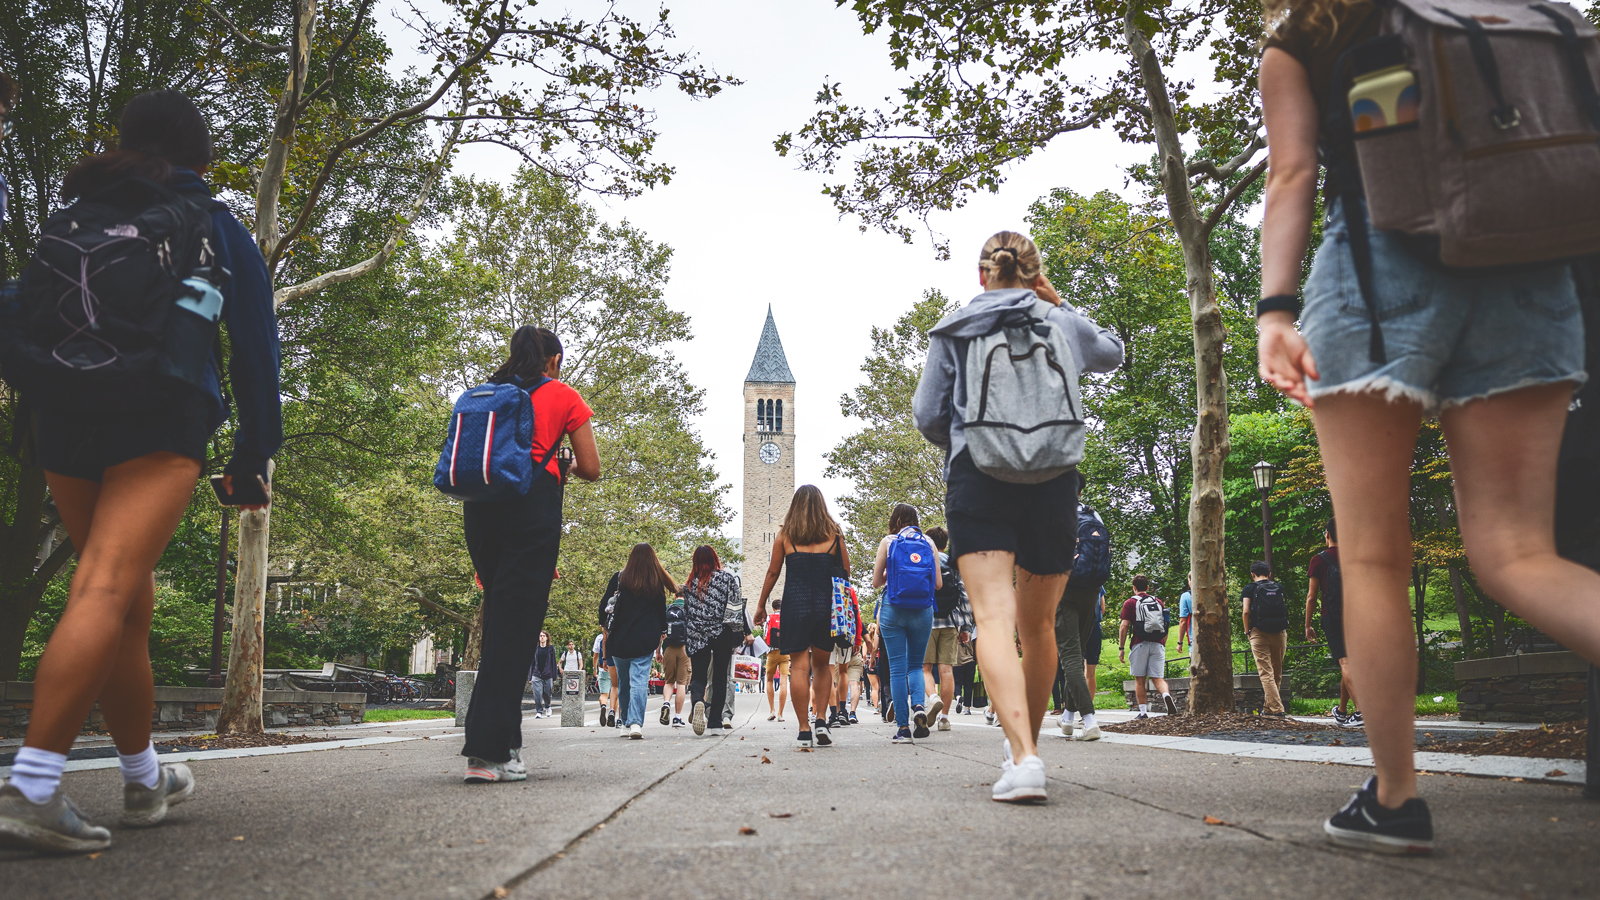 A group of college Cornell students walking toward McGraw Tower on the Cornell University campus with their backs turned to the camera.